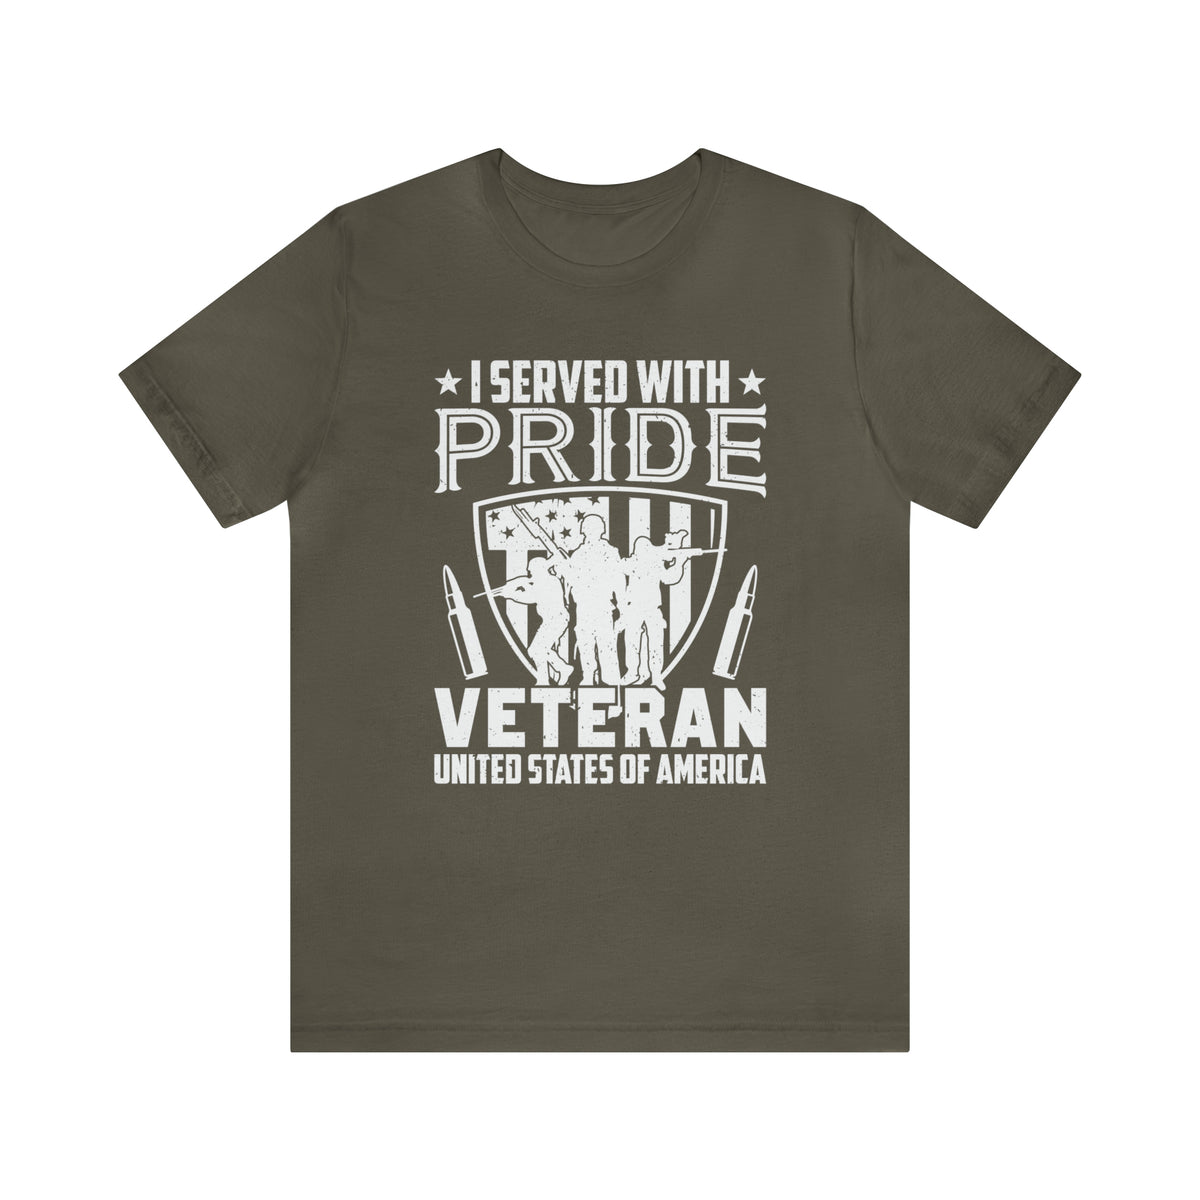 I Served With Pride Veteran USA T-Shirt